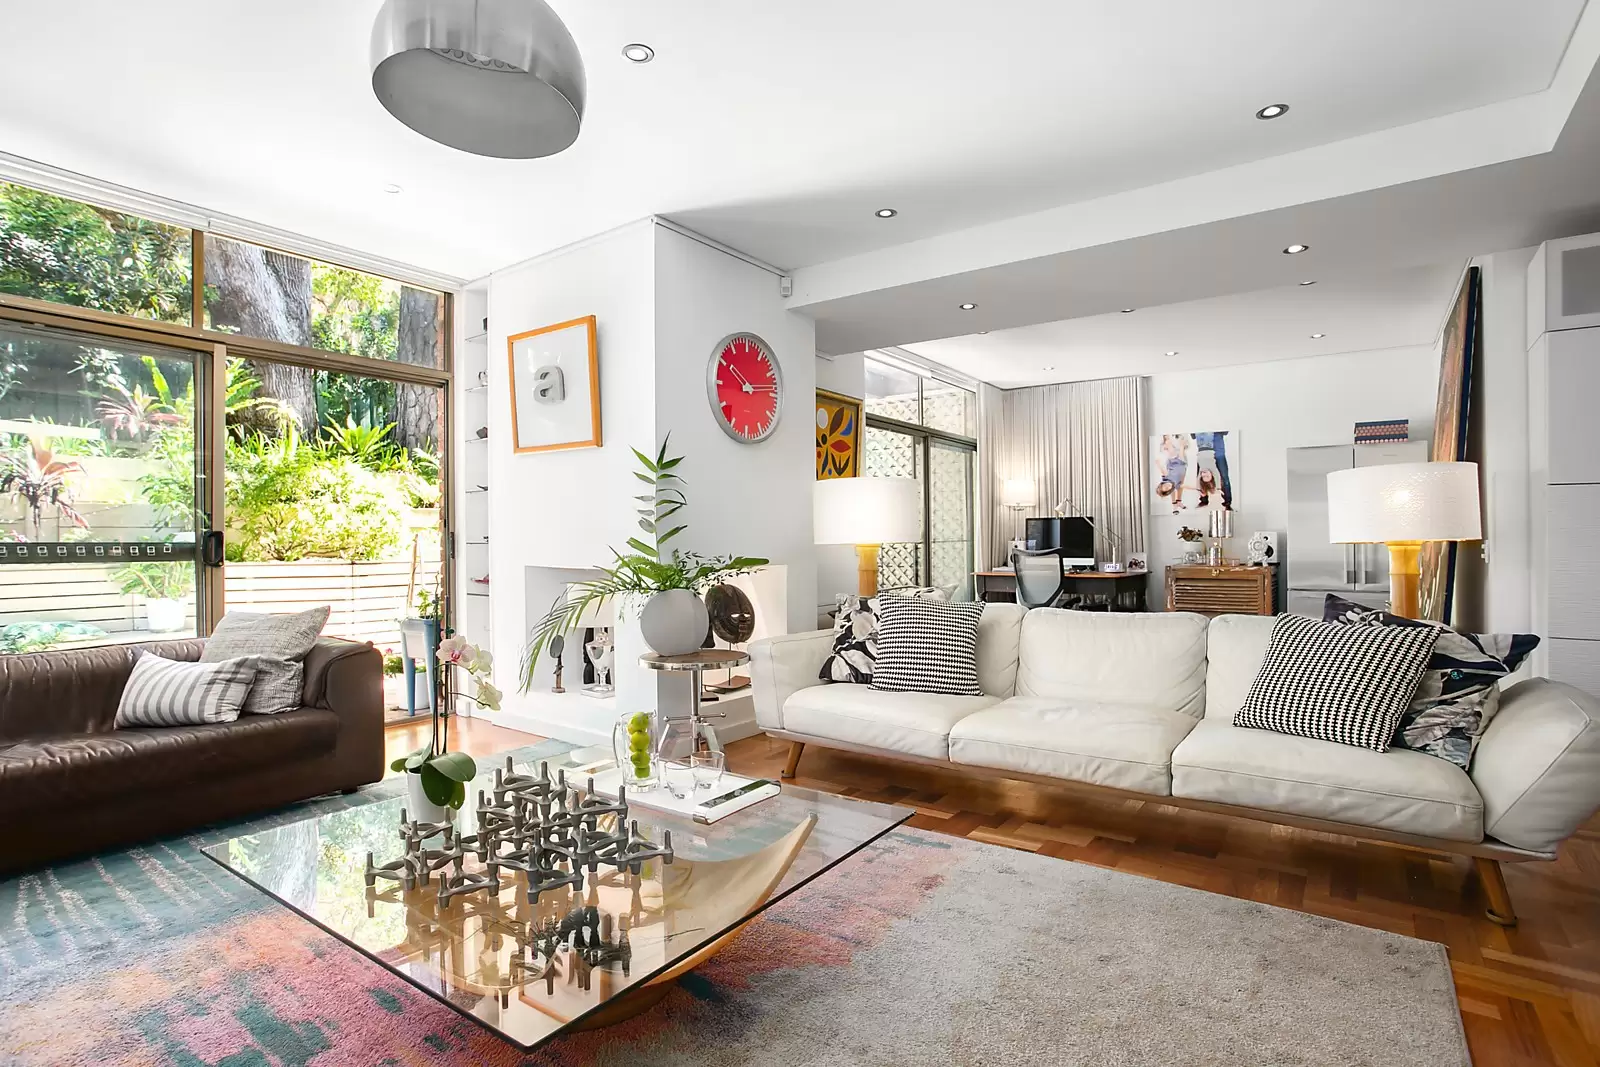 Photo #8: 6/83 Ocean Street, Woollahra - Sold by Sydney Sotheby's International Realty